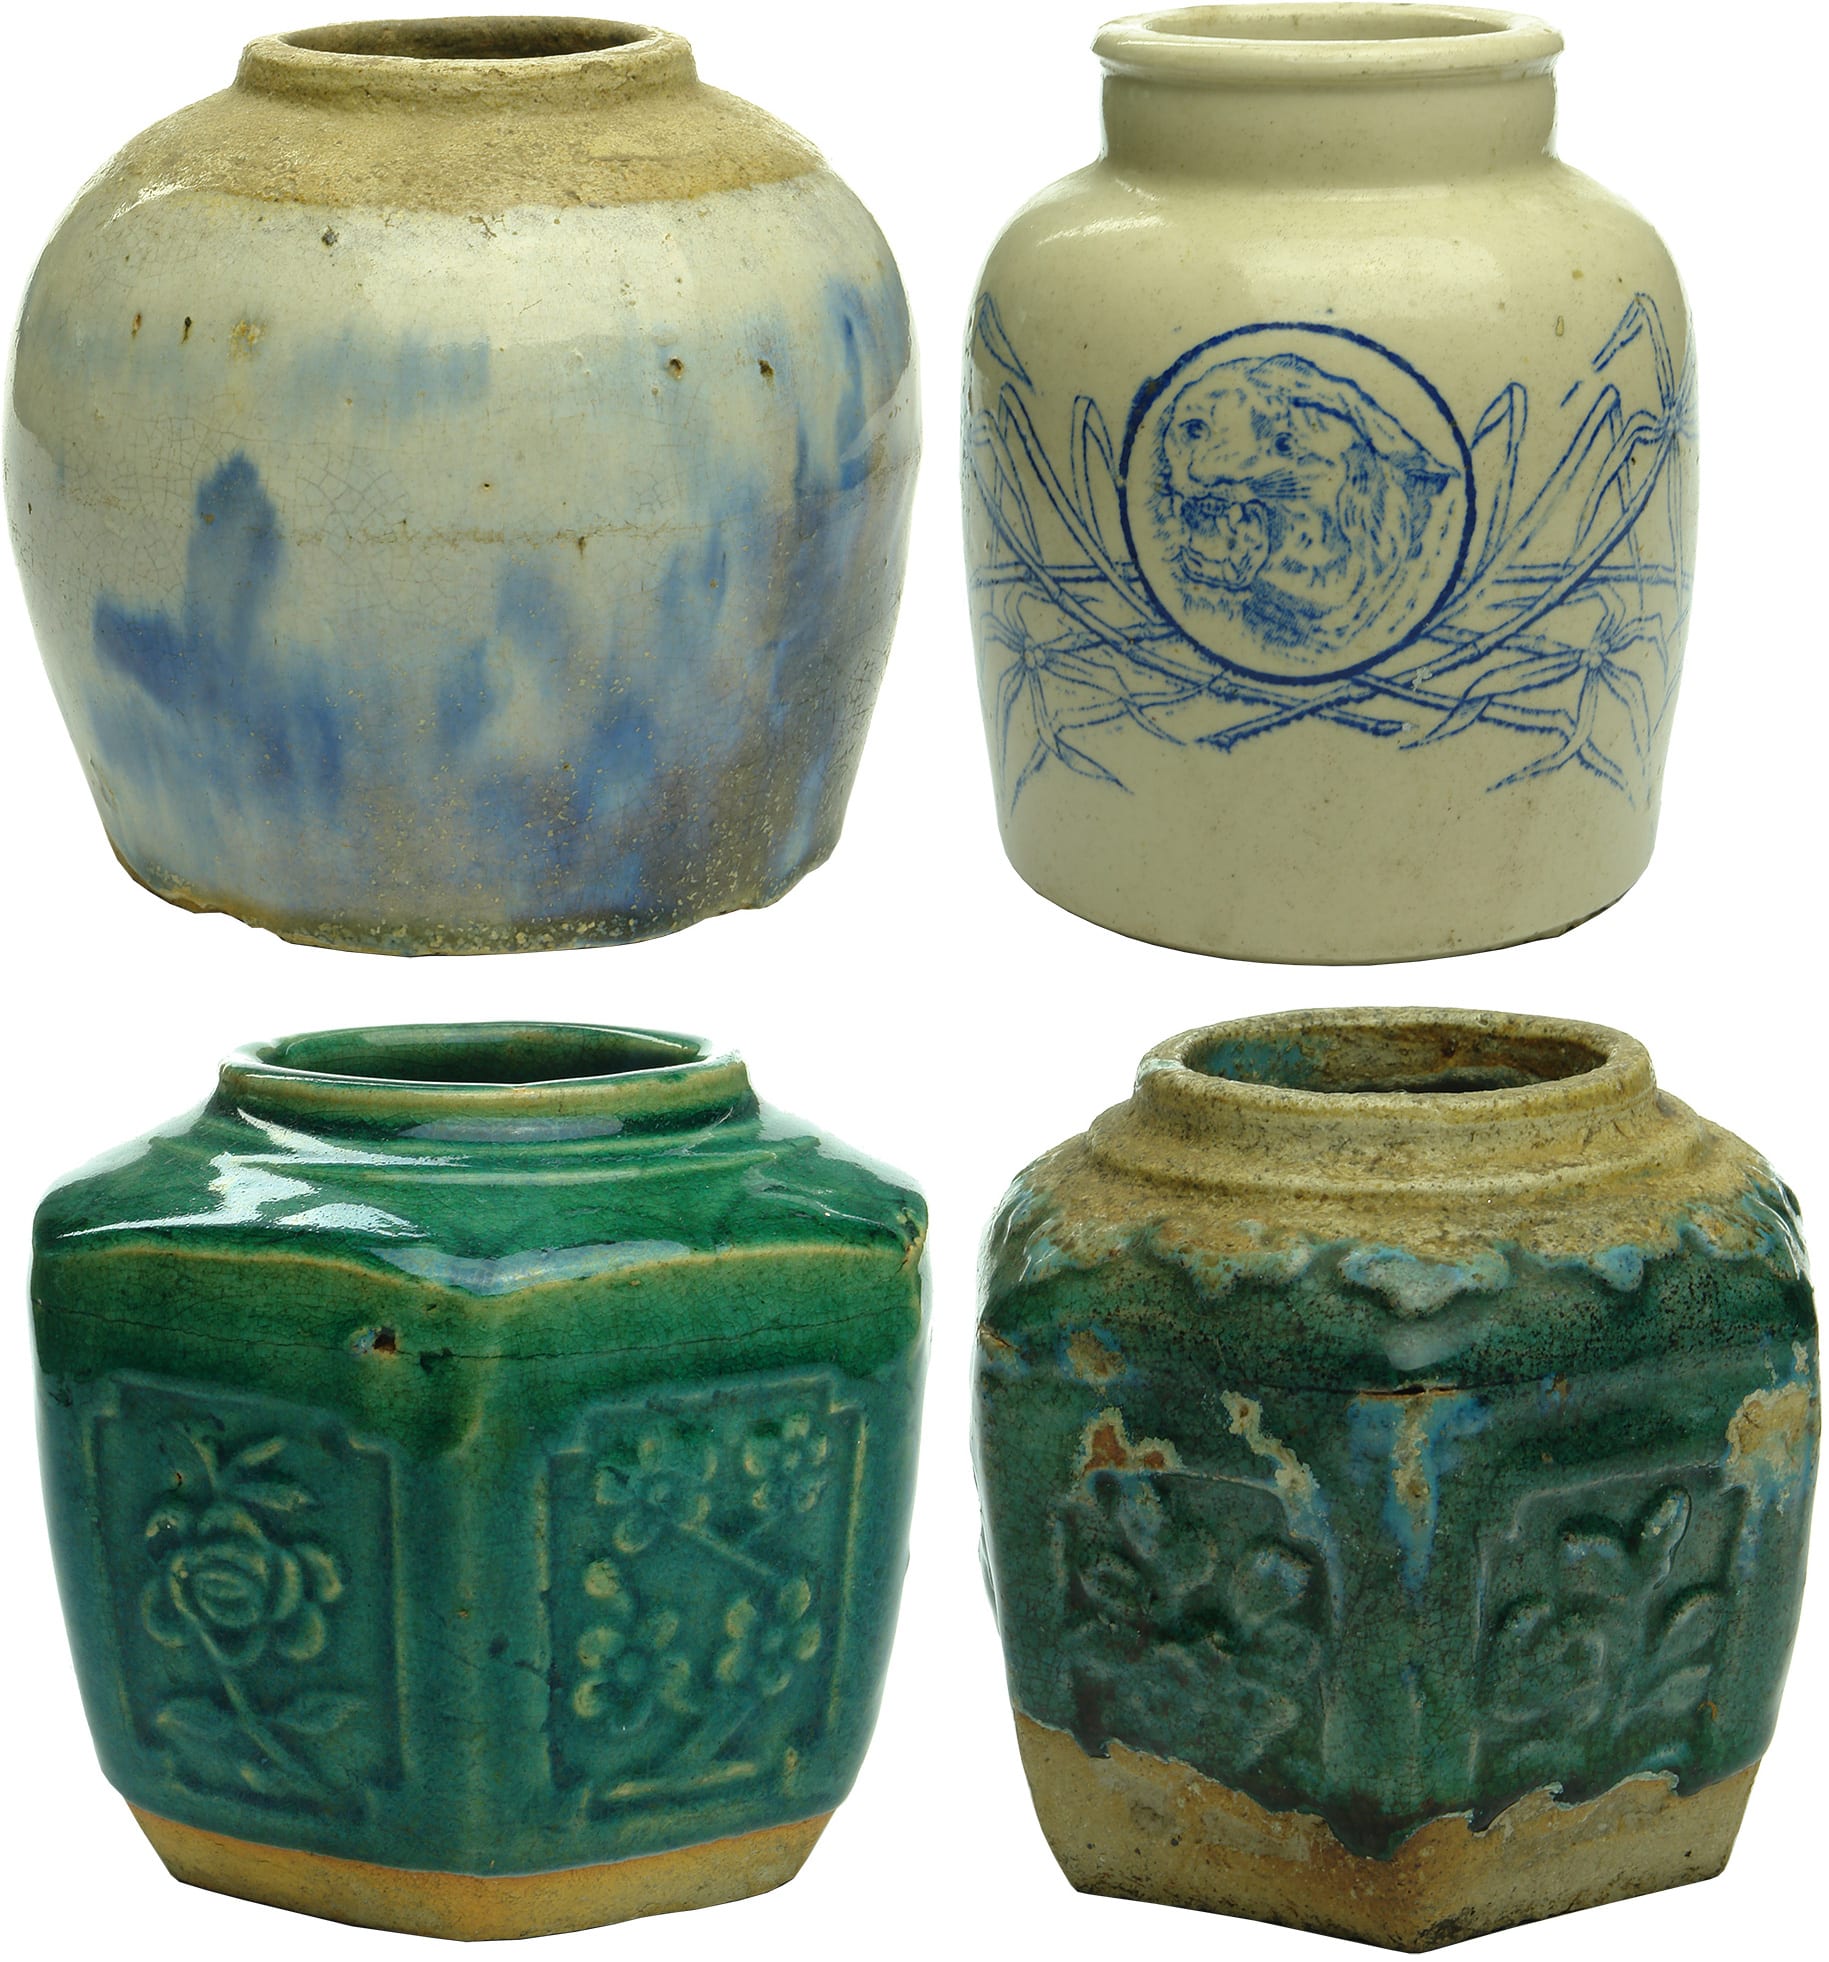 Antique Chinese Pottery Jars Pots